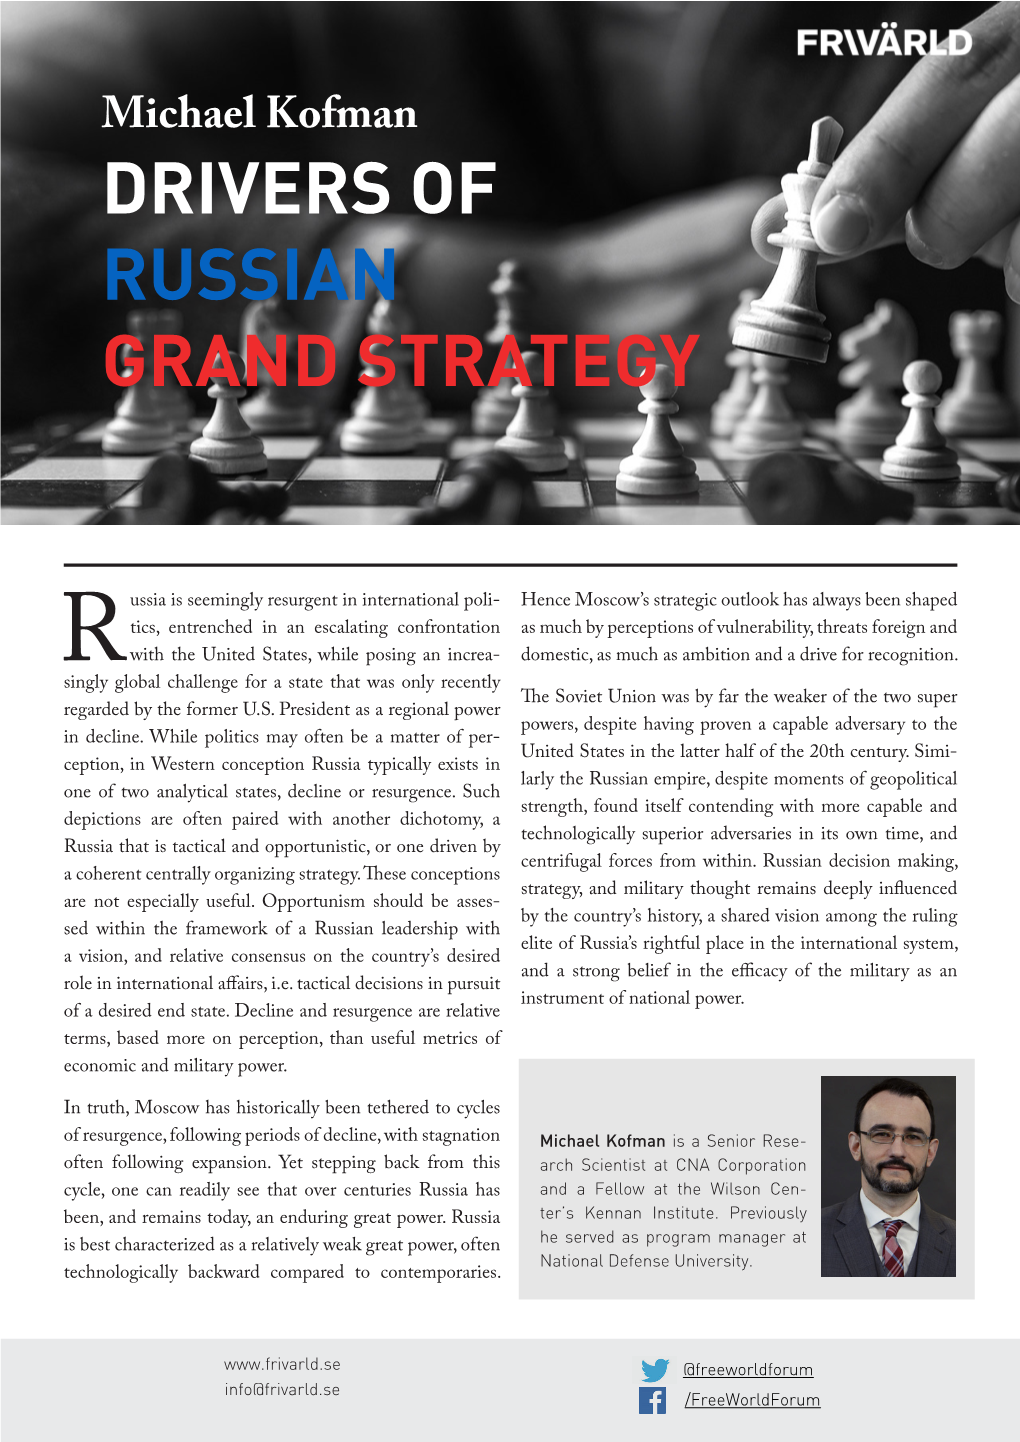 Drivers of Russian Grand Strategy